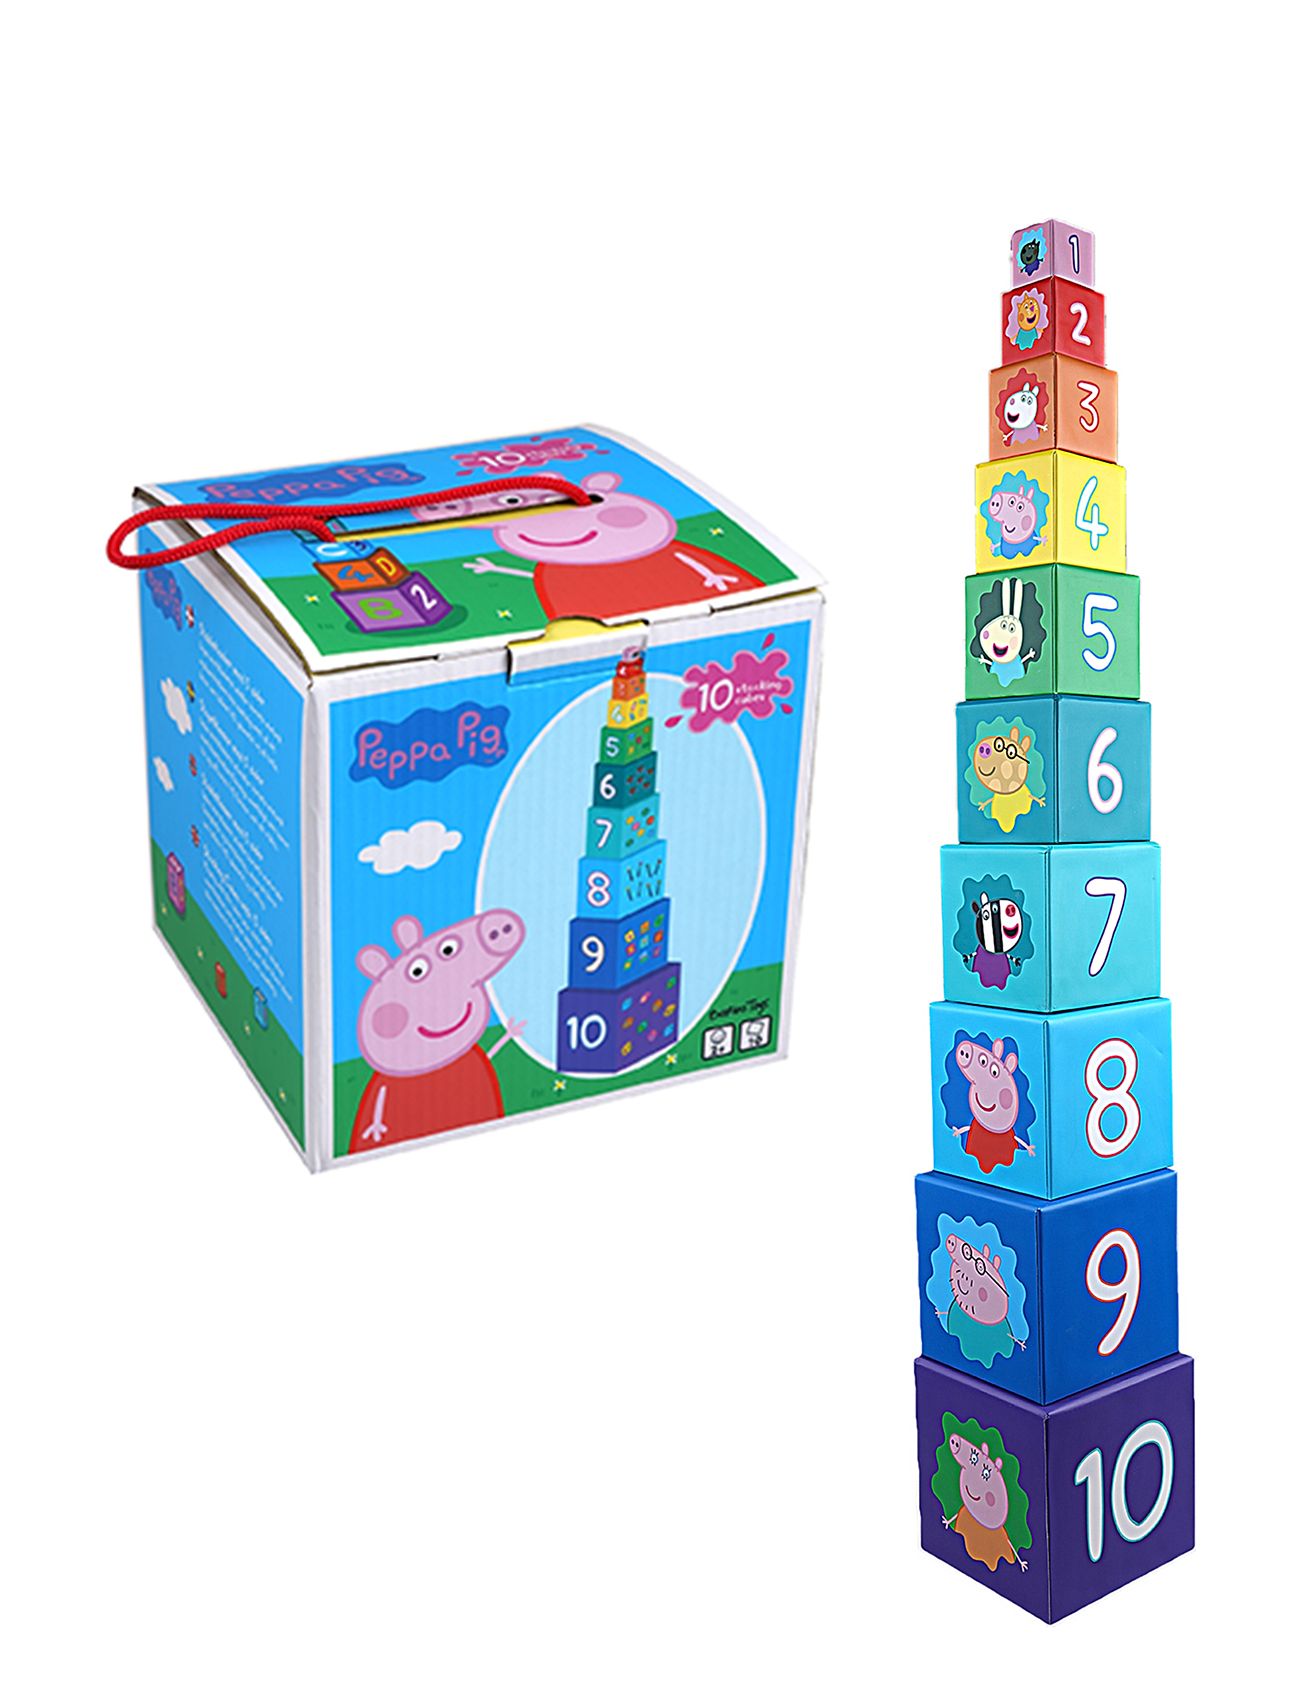 Peppa Pig Stacking Cubes Toys Baby Toys Educational Toys Stackable Blocks Multi/patterned Gurli Gris